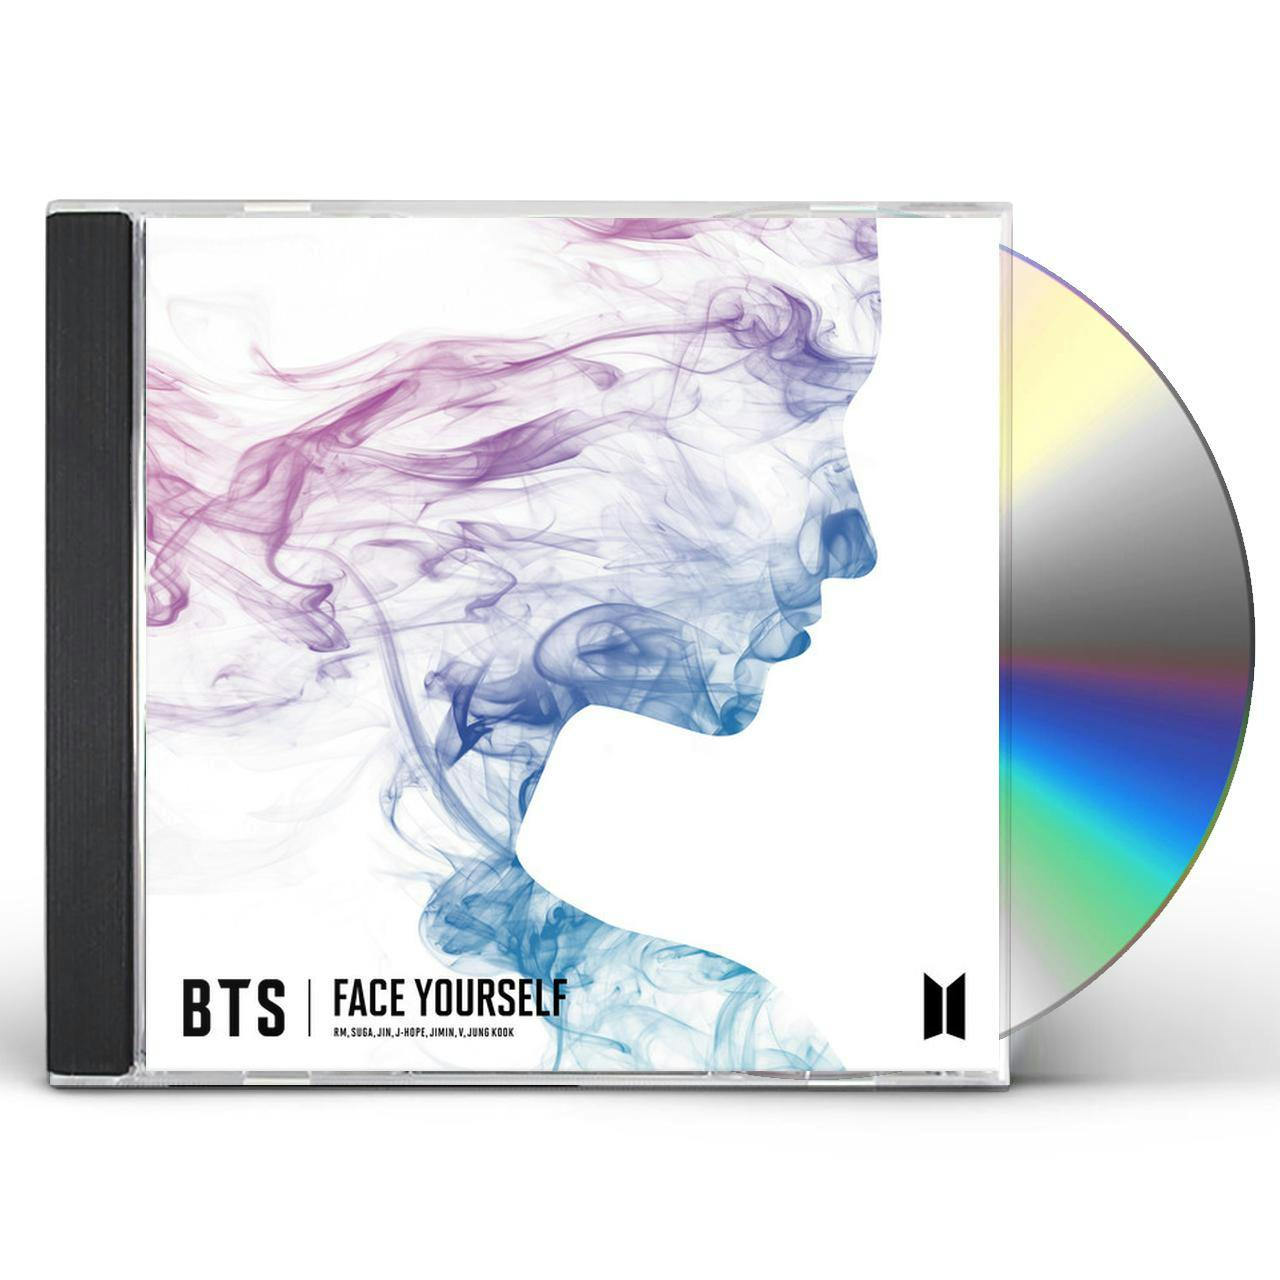 BTS FACE YOURSELF CD